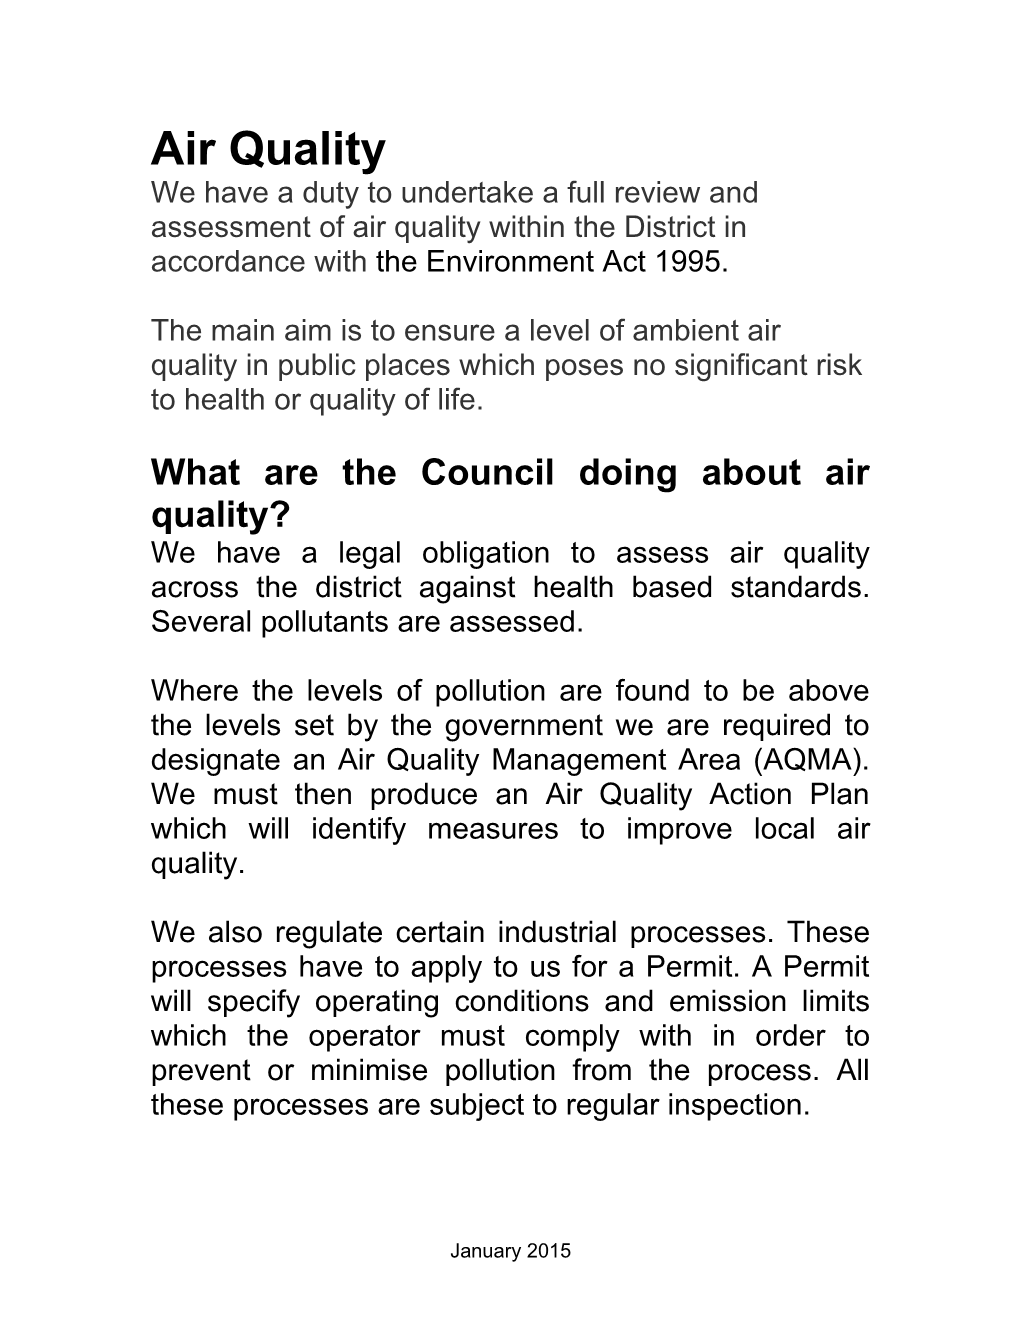 What Are the Council Doing About Air Quality?